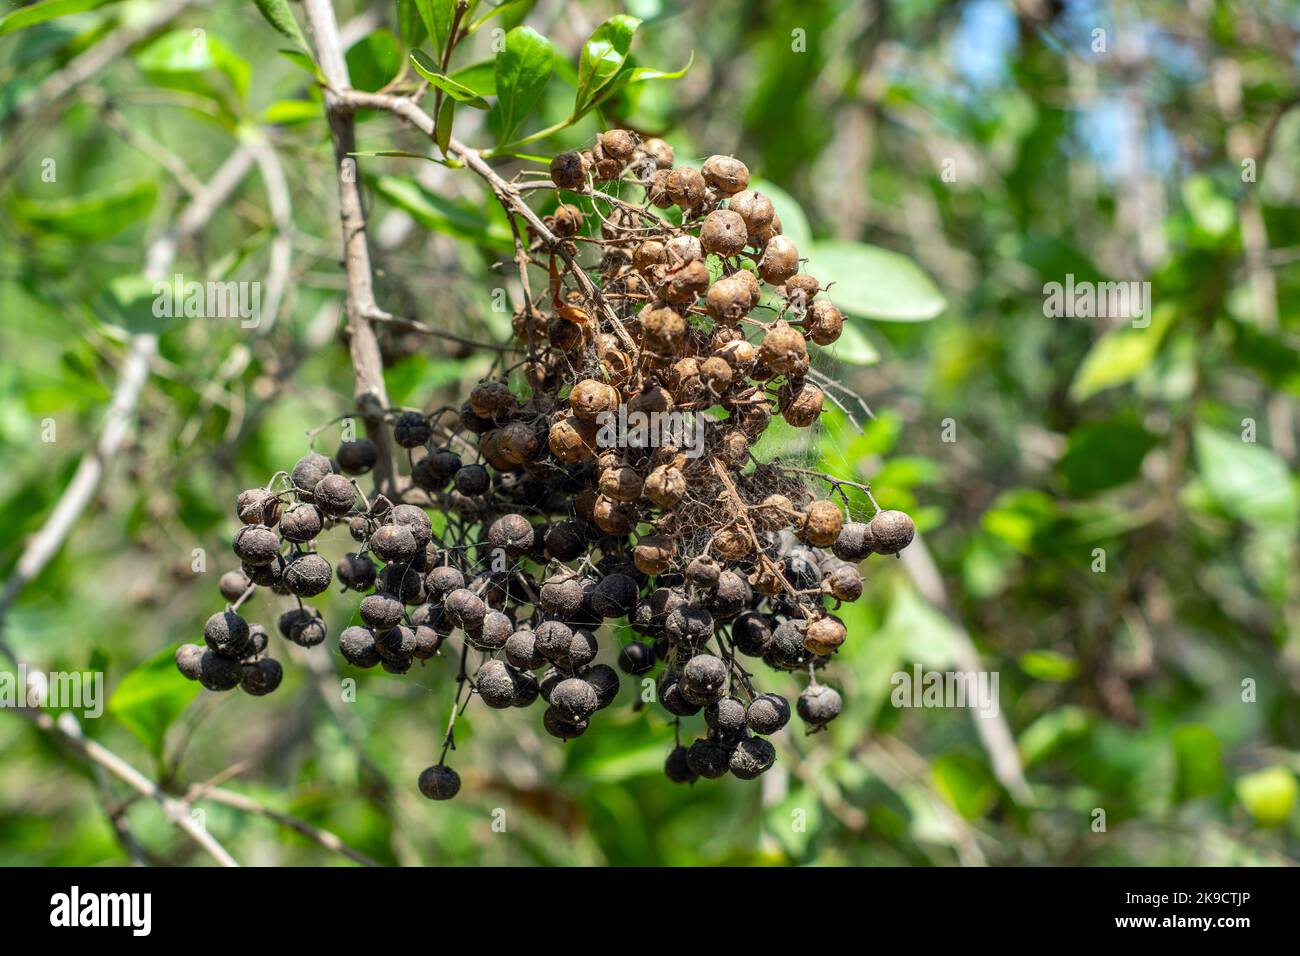 Seed pods on the henna tree Stock Photo